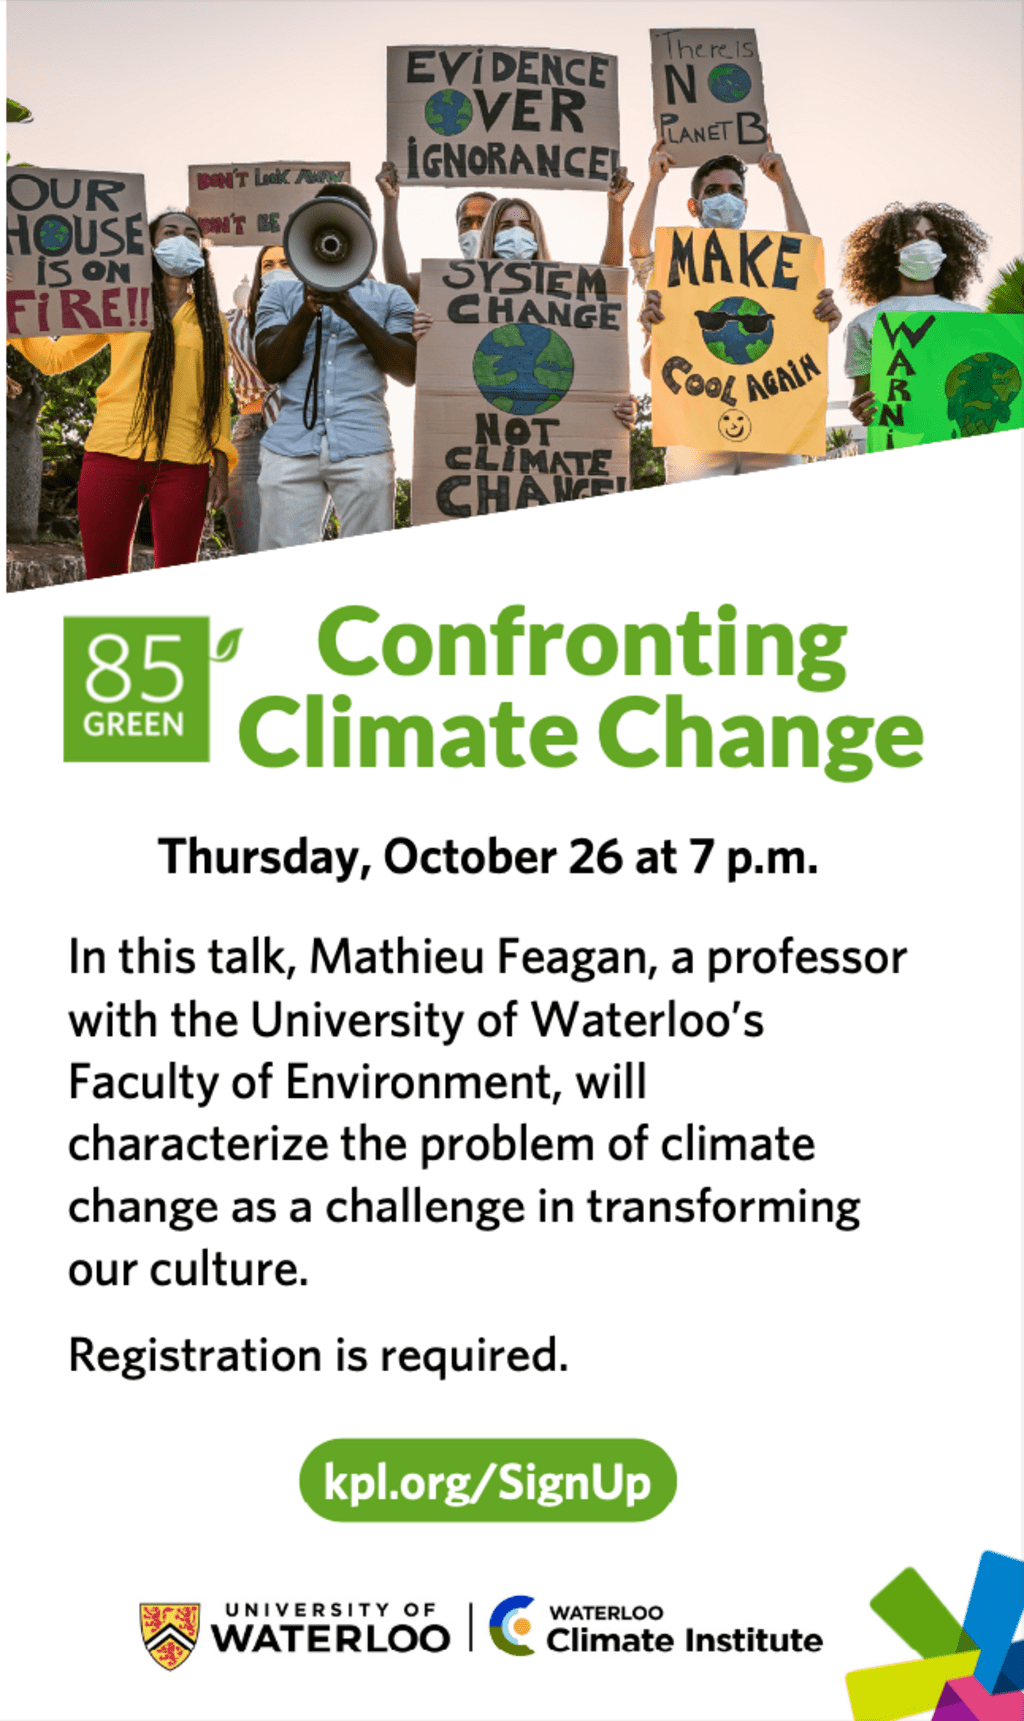 Confronting Climate Change event poster